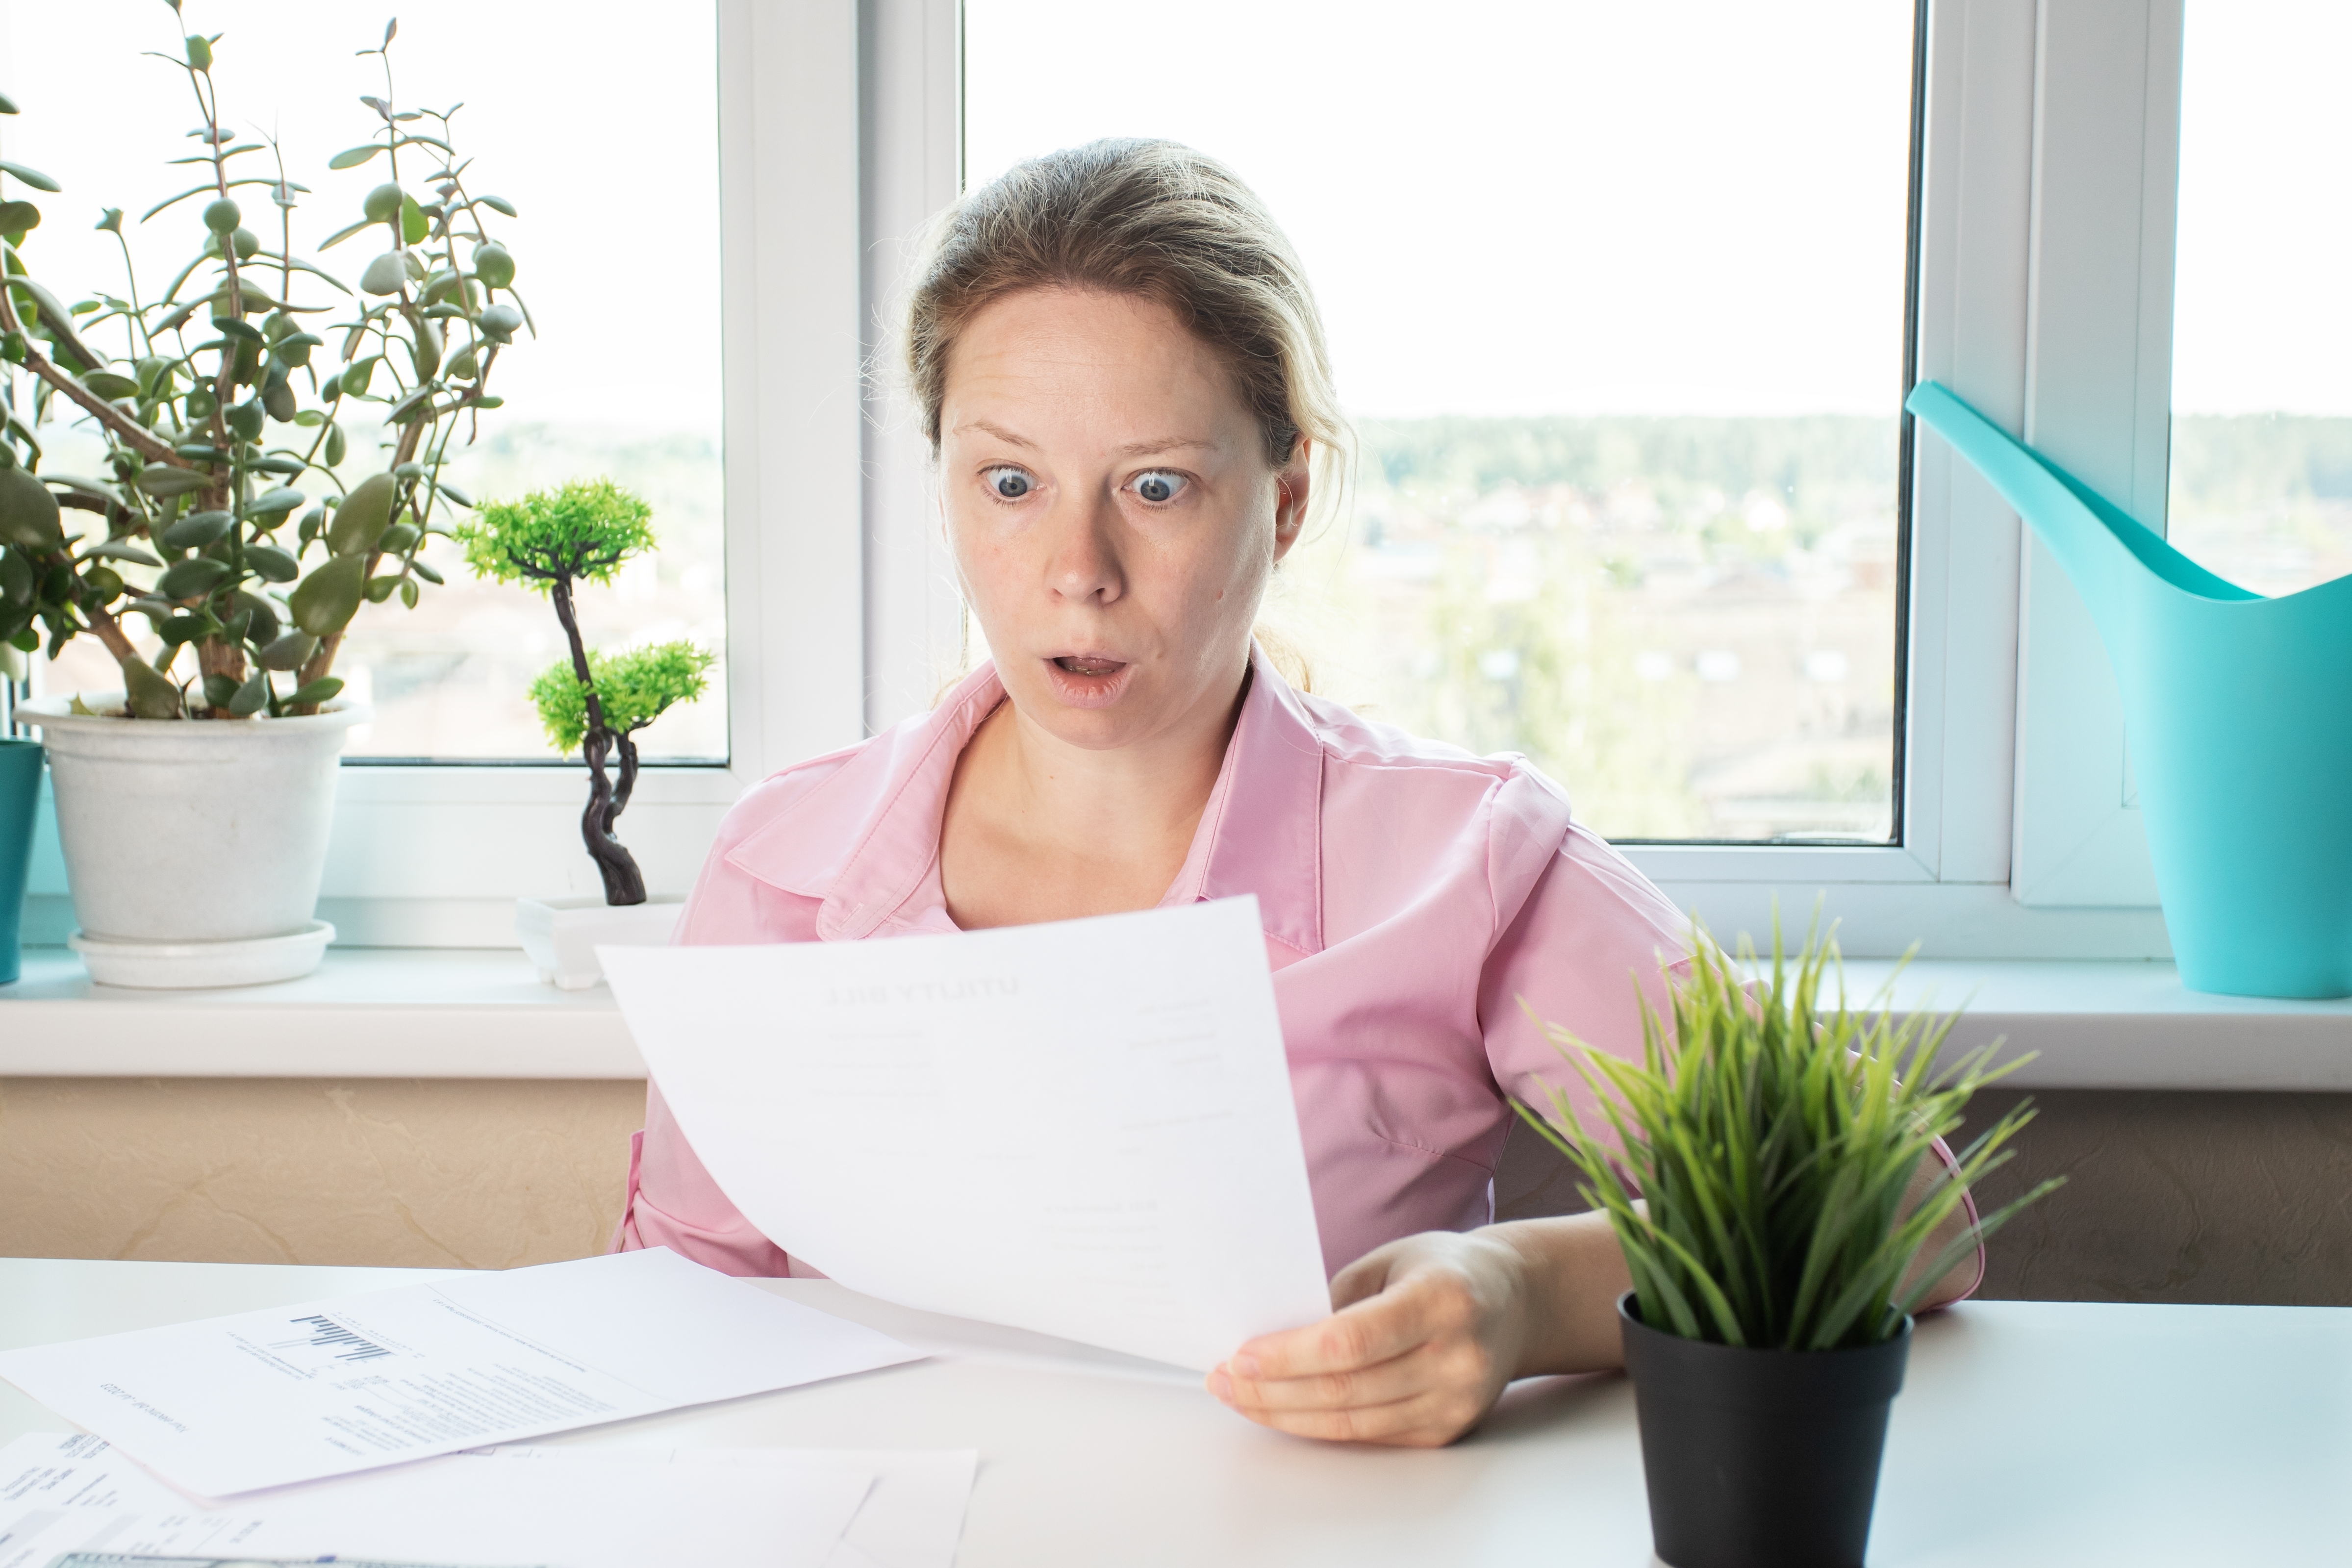 A shocked woman reading a letter | Source: Shutterstock